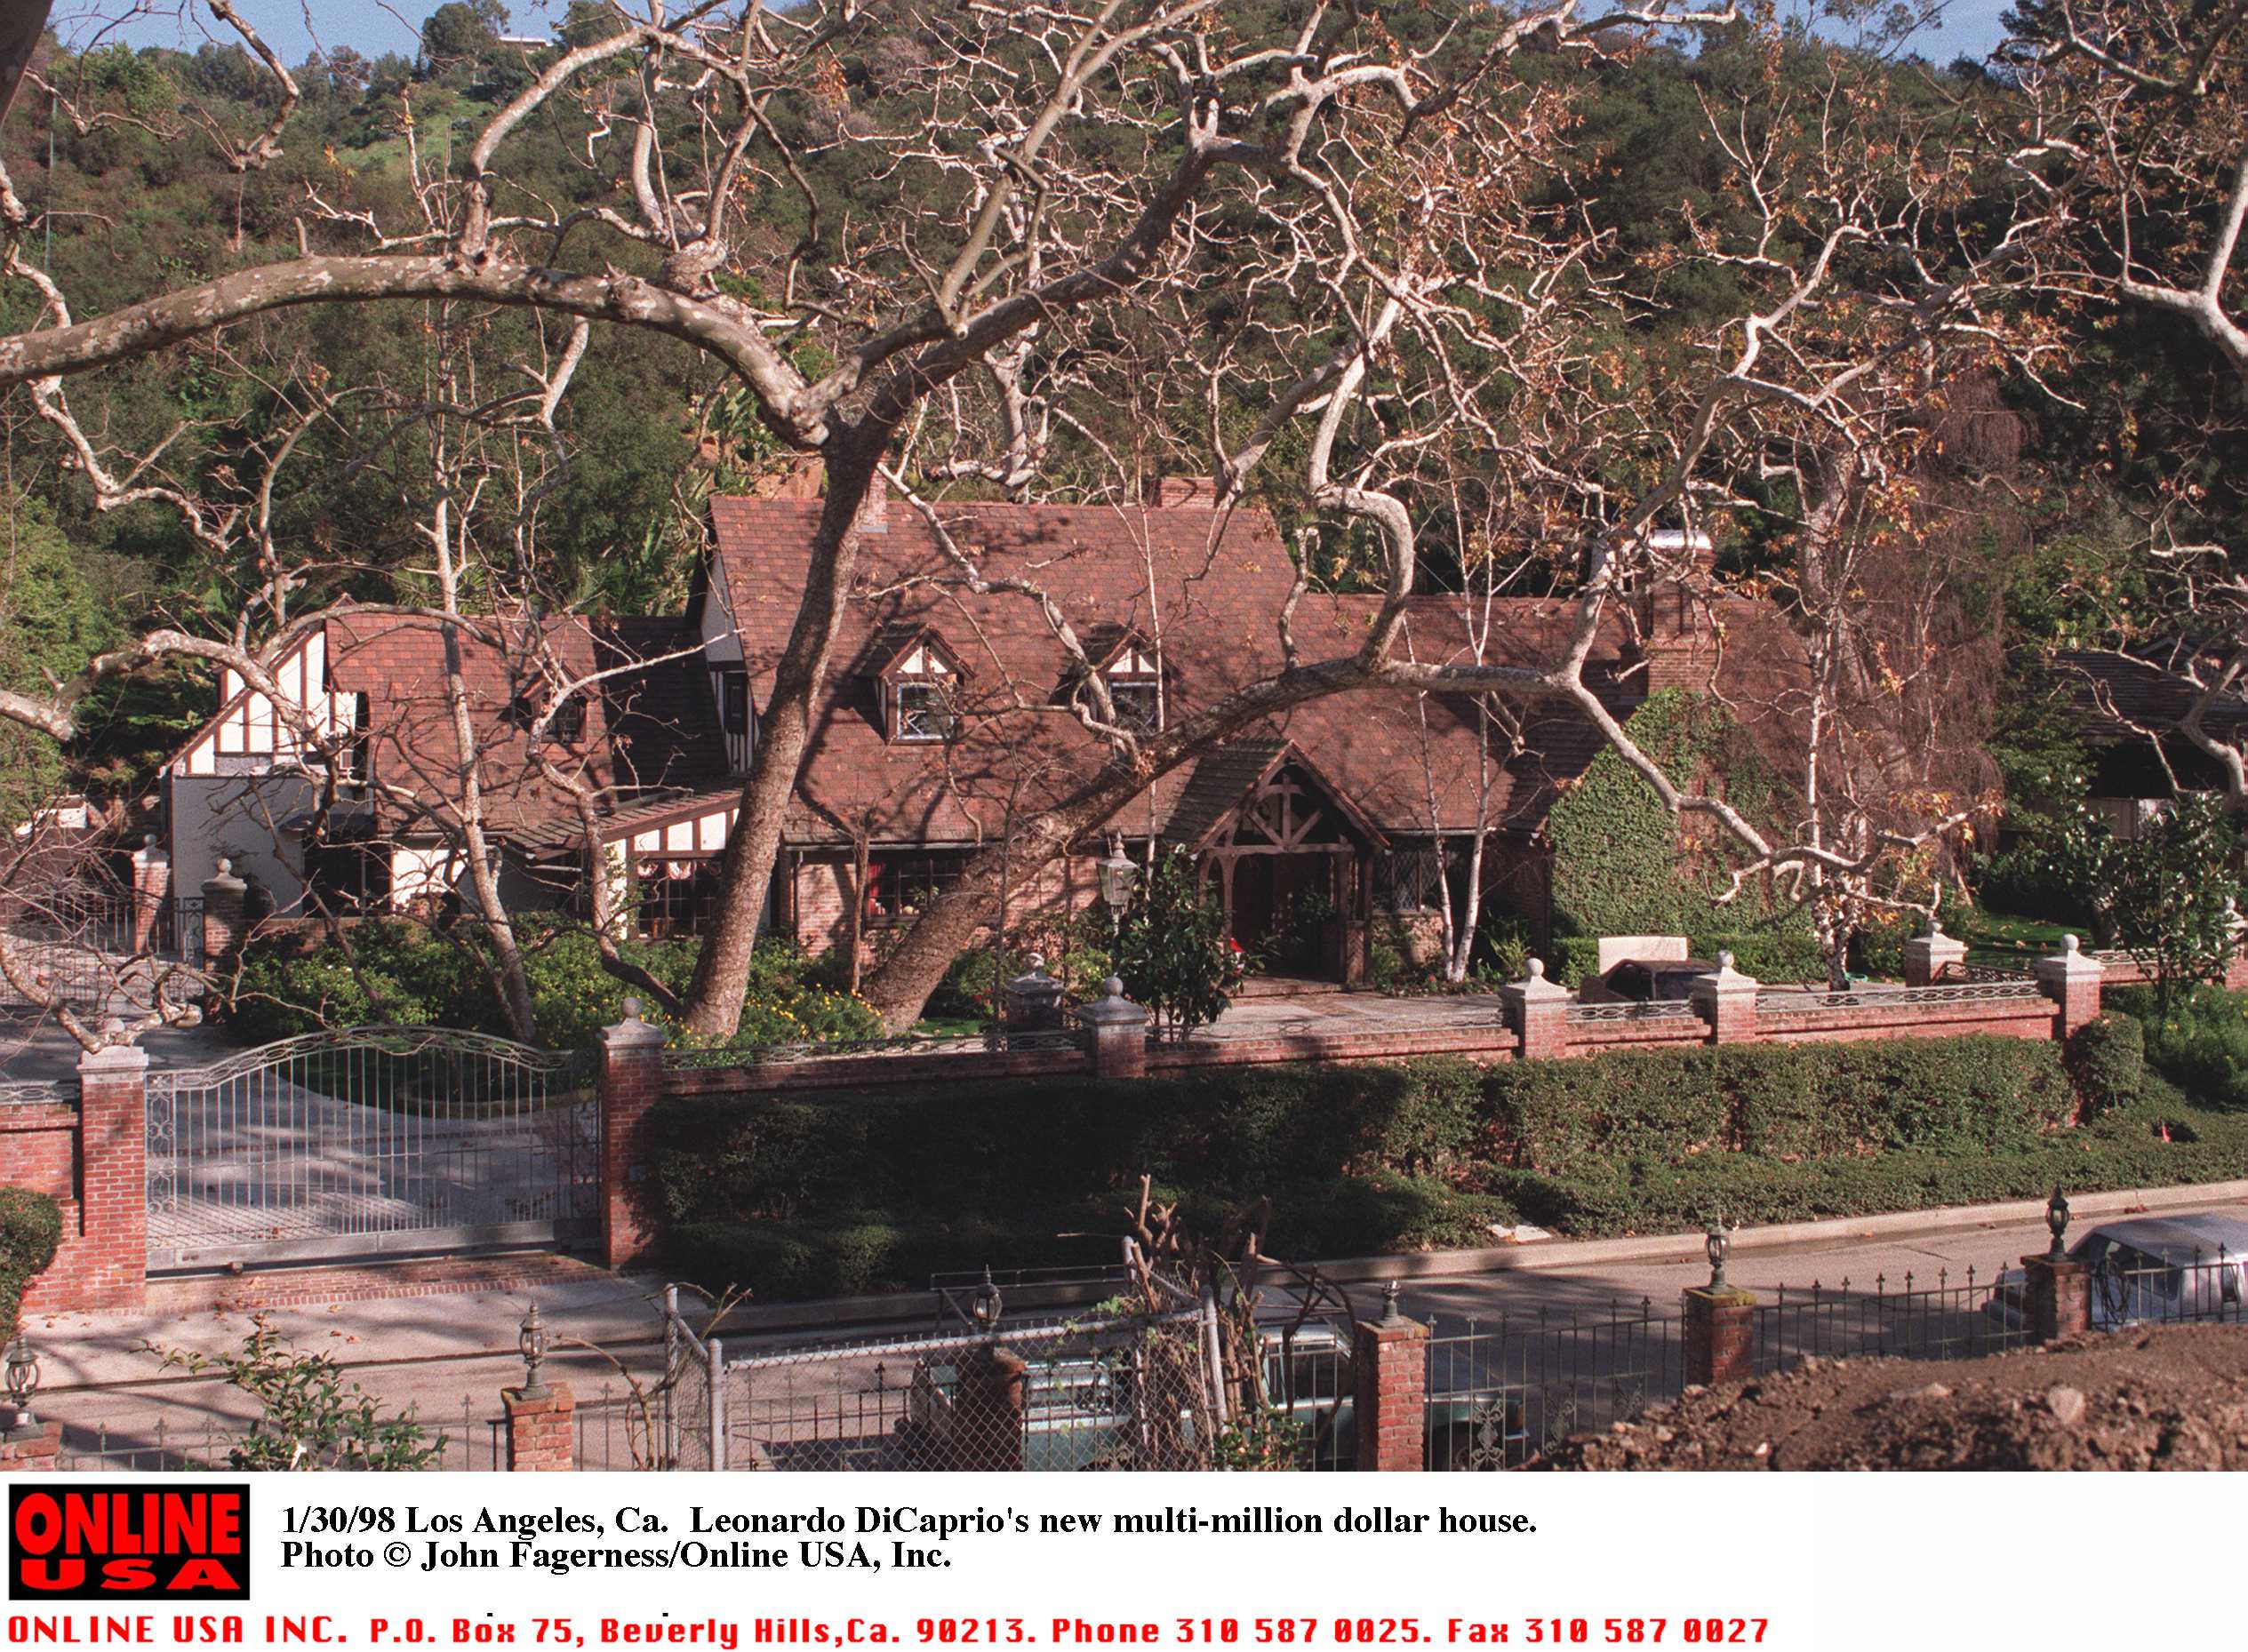 Leonardo Dicaprio's bungalow as seen on January 30, 1998 | Source: Getty Images